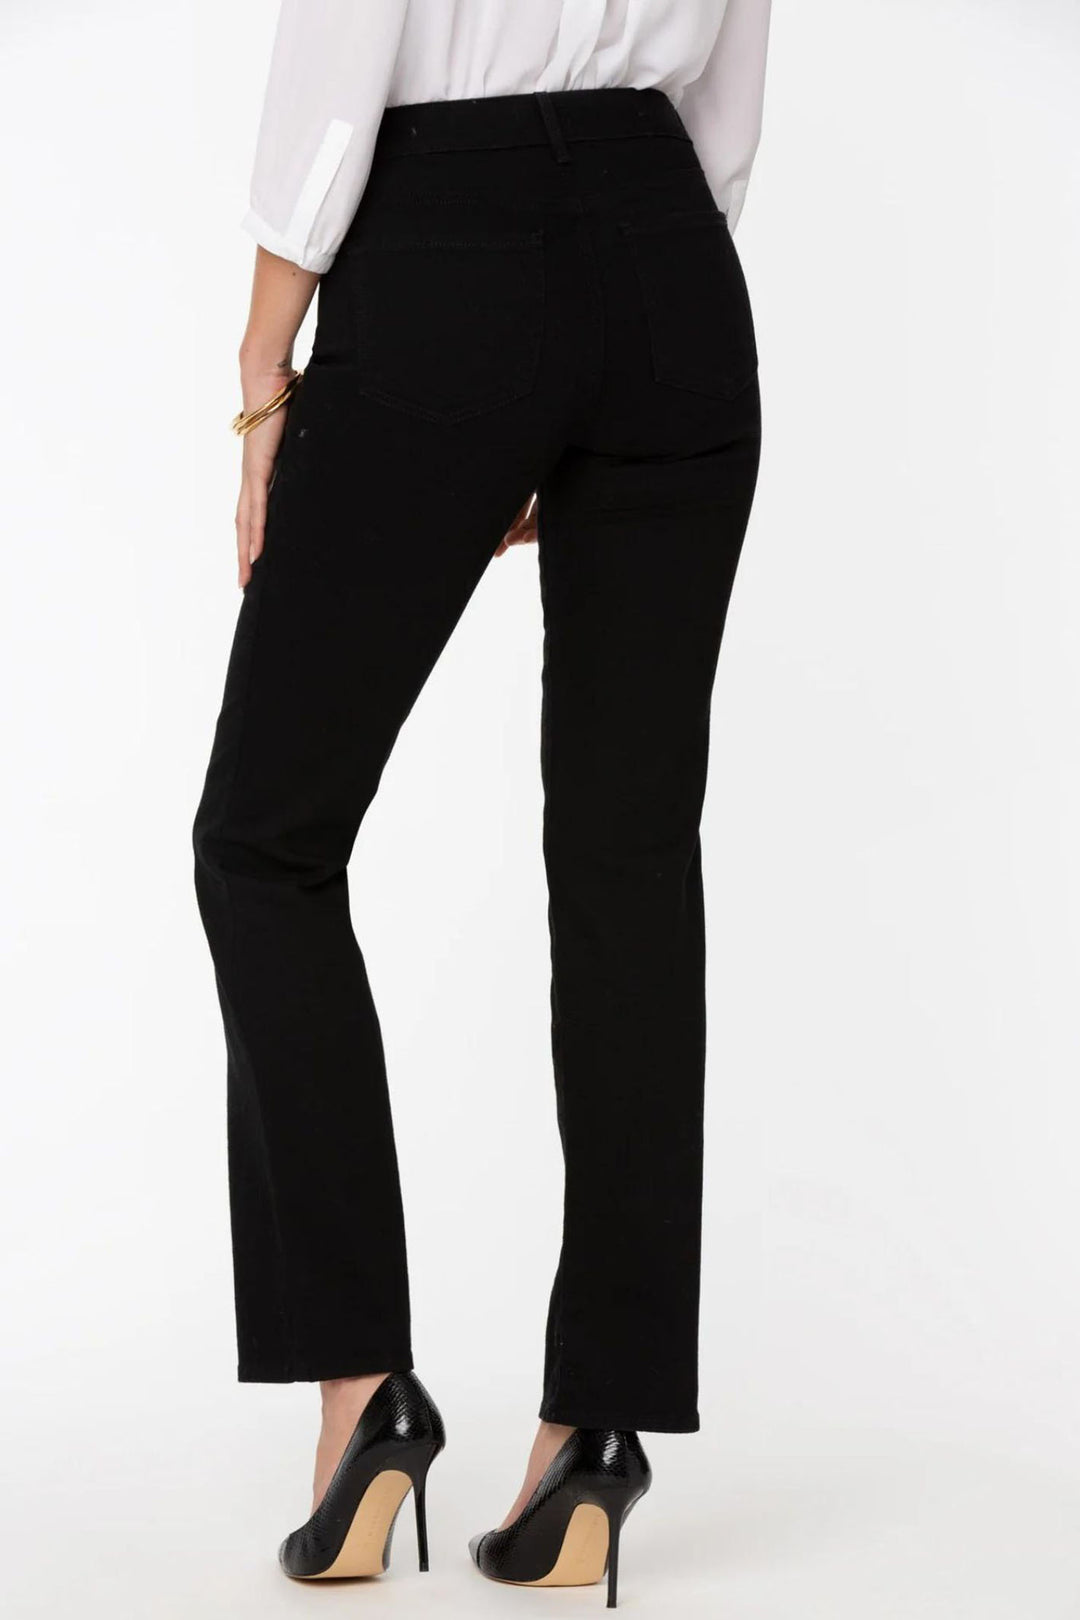 NYDJ Marilyn MNBBMS8517 Black Straight Leg Jeans - Experience Boutique